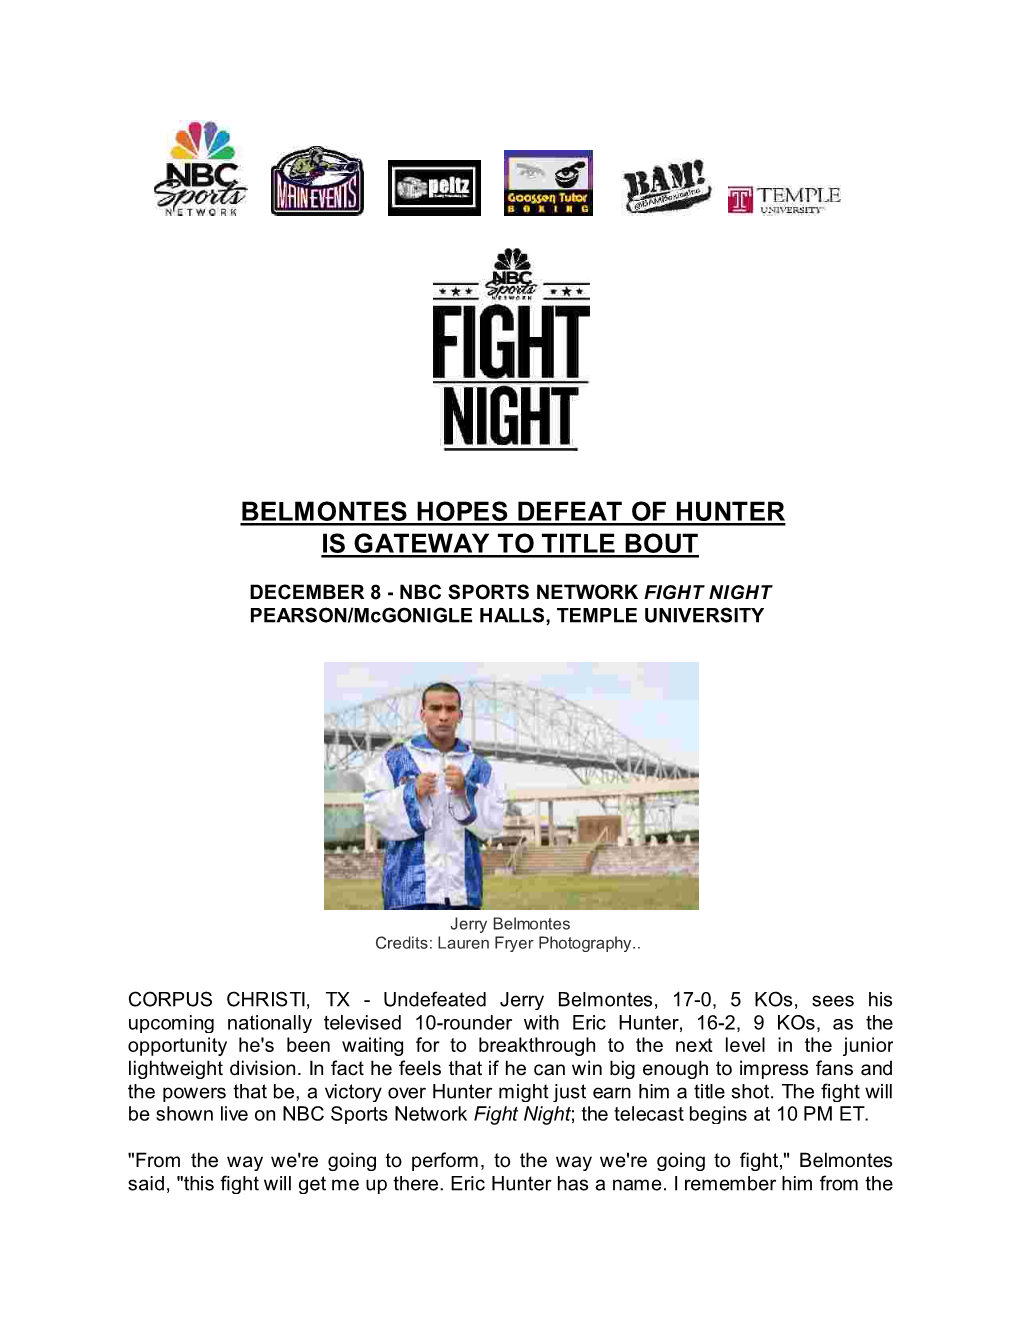 Belmontes Hopes Defeat of Hunter Is Gateway to Title Bout